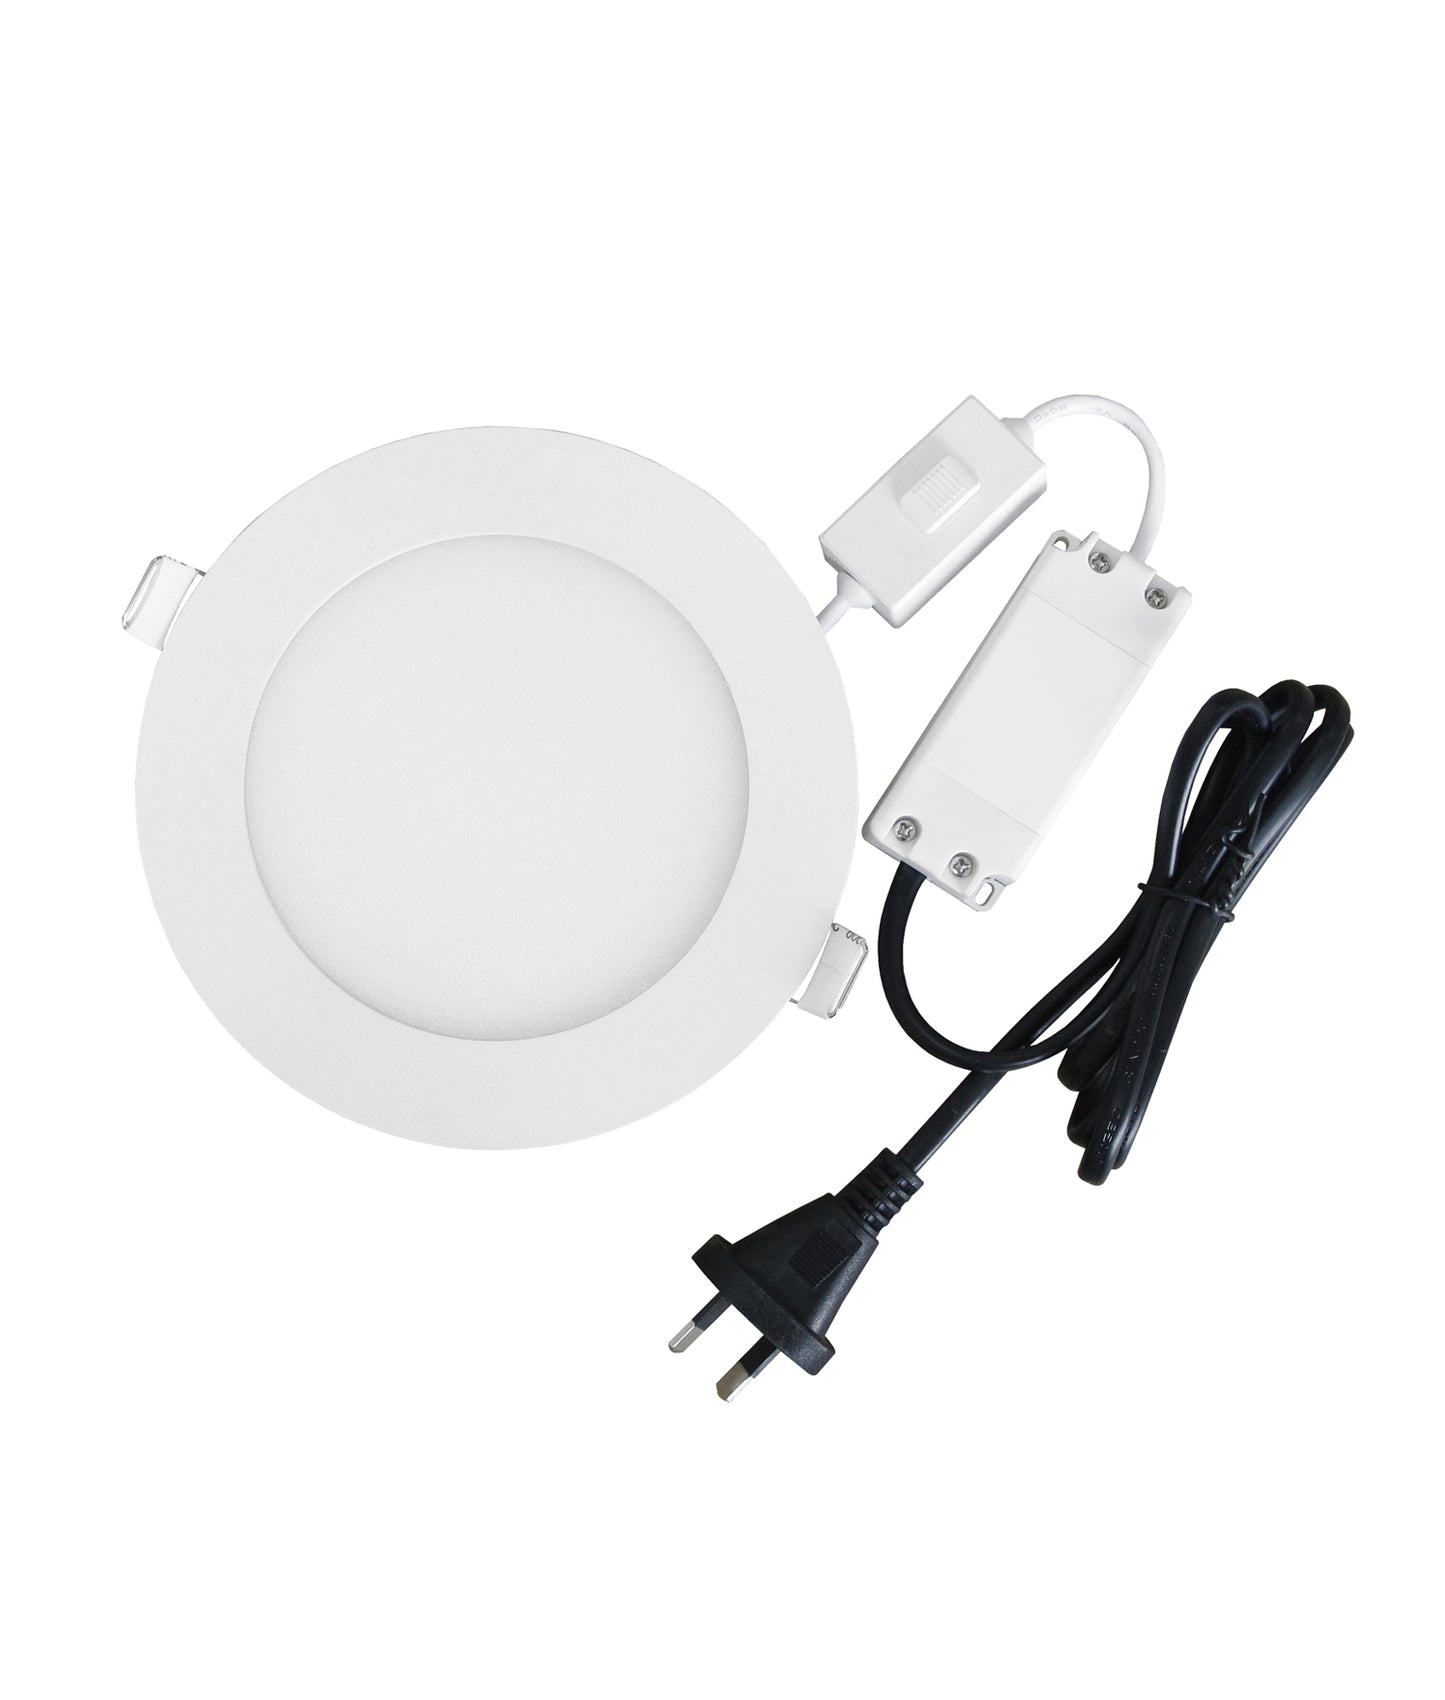 SLICKTRI: LED Dimmable Ultra Slim Tri-CCT Recessed Downlights (Round)